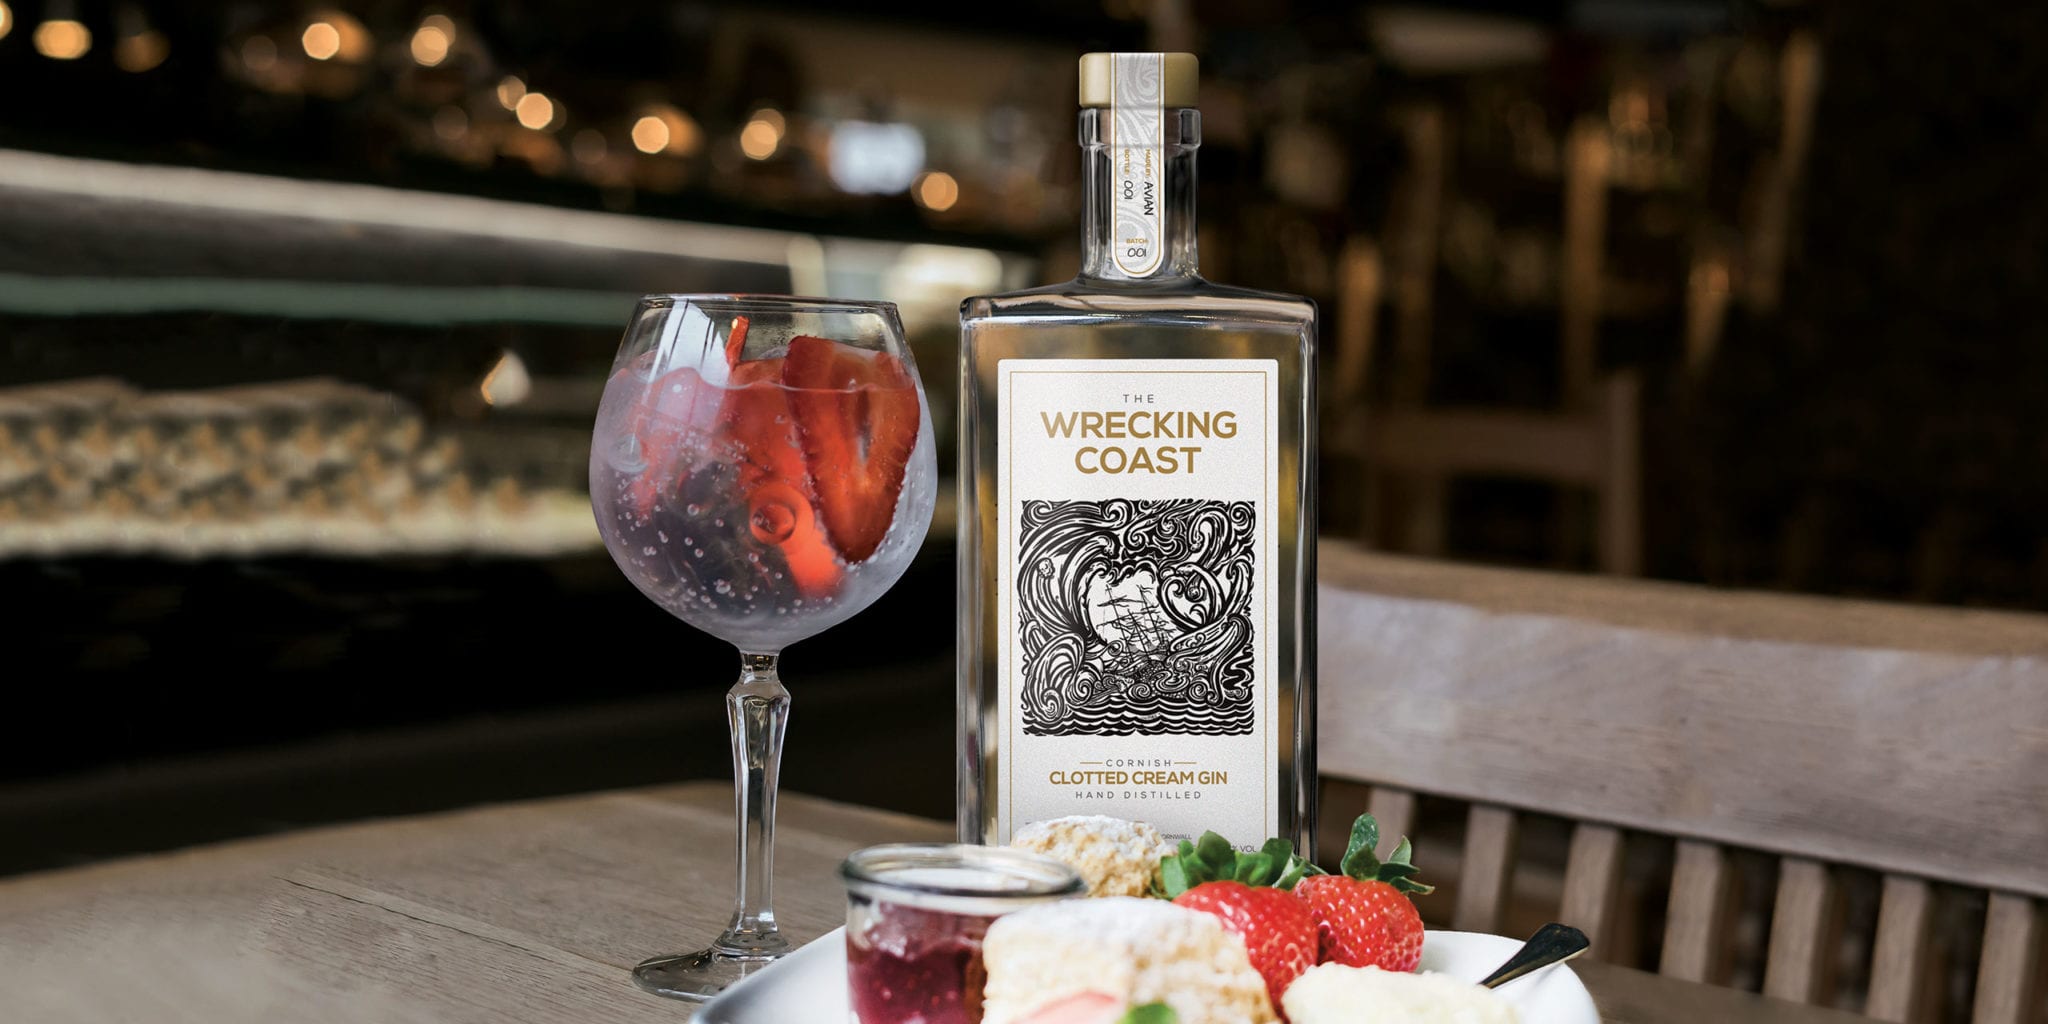 A Cornish Clotted Cream Gin bottle next to a glass of gin with strawberries and plated ingredients of a traditional Cornish cream tea